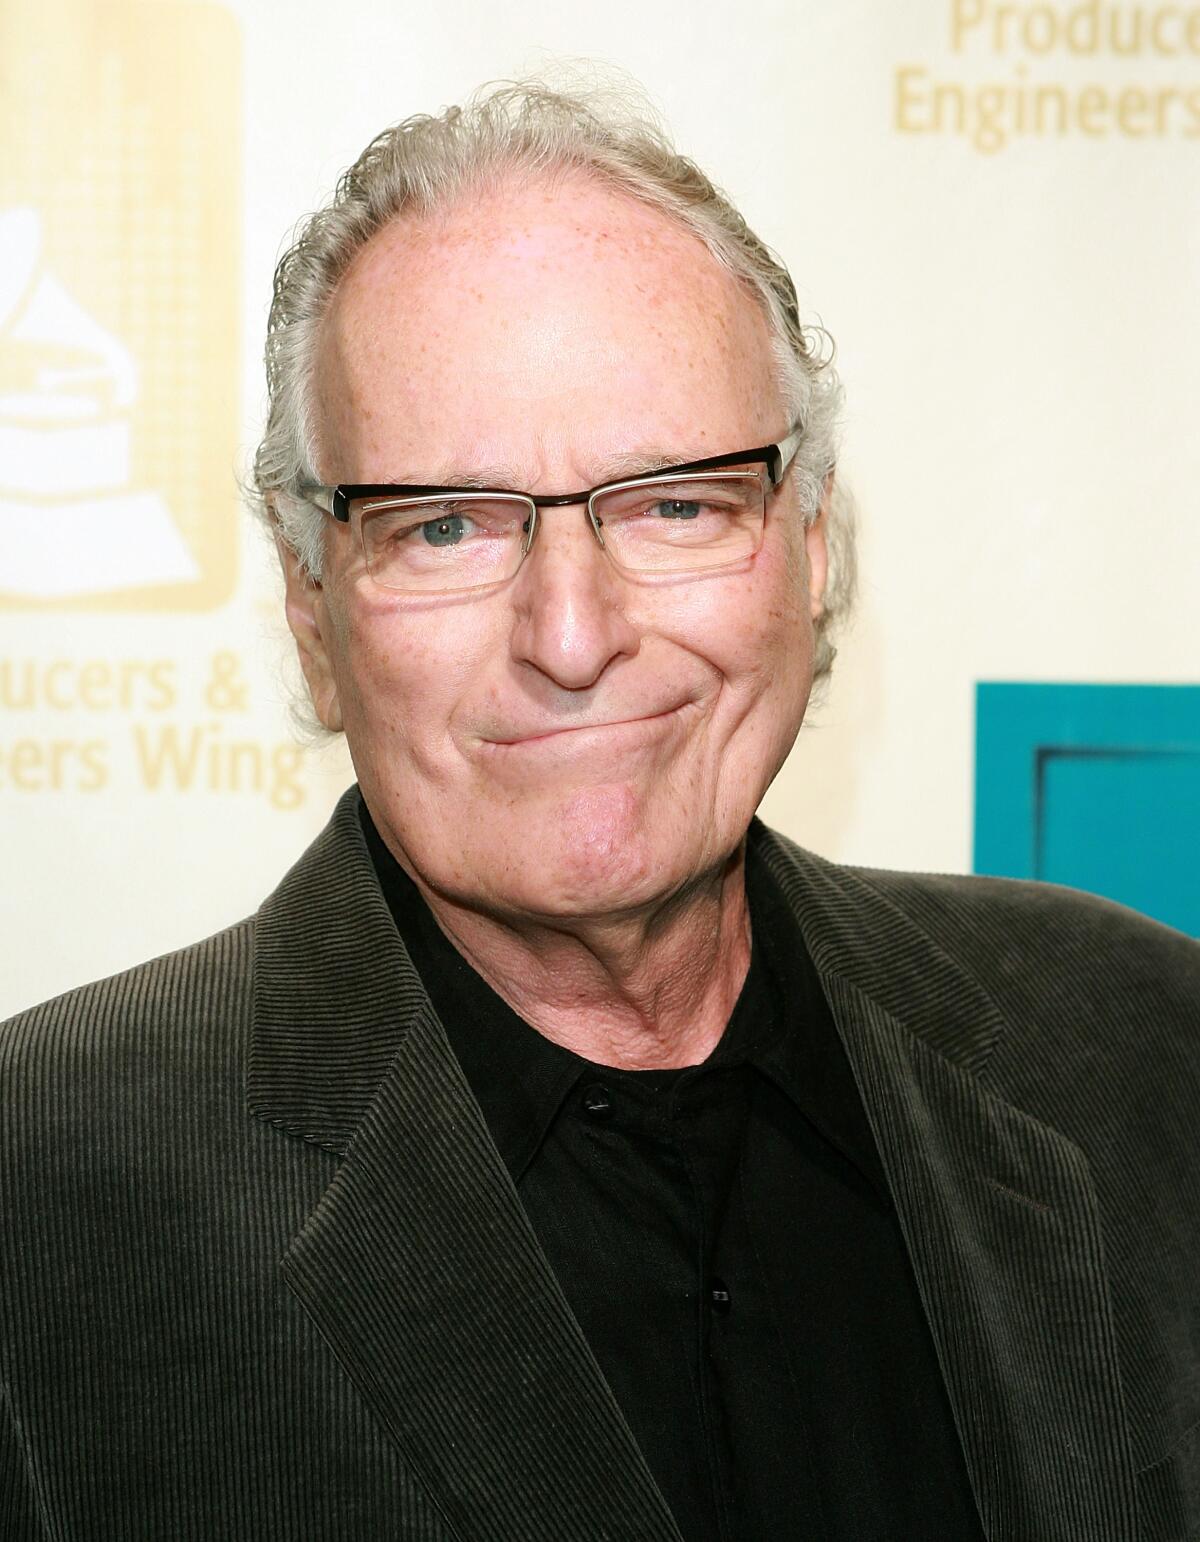 A man with gray hair, glasses and a wry smile, wearing black